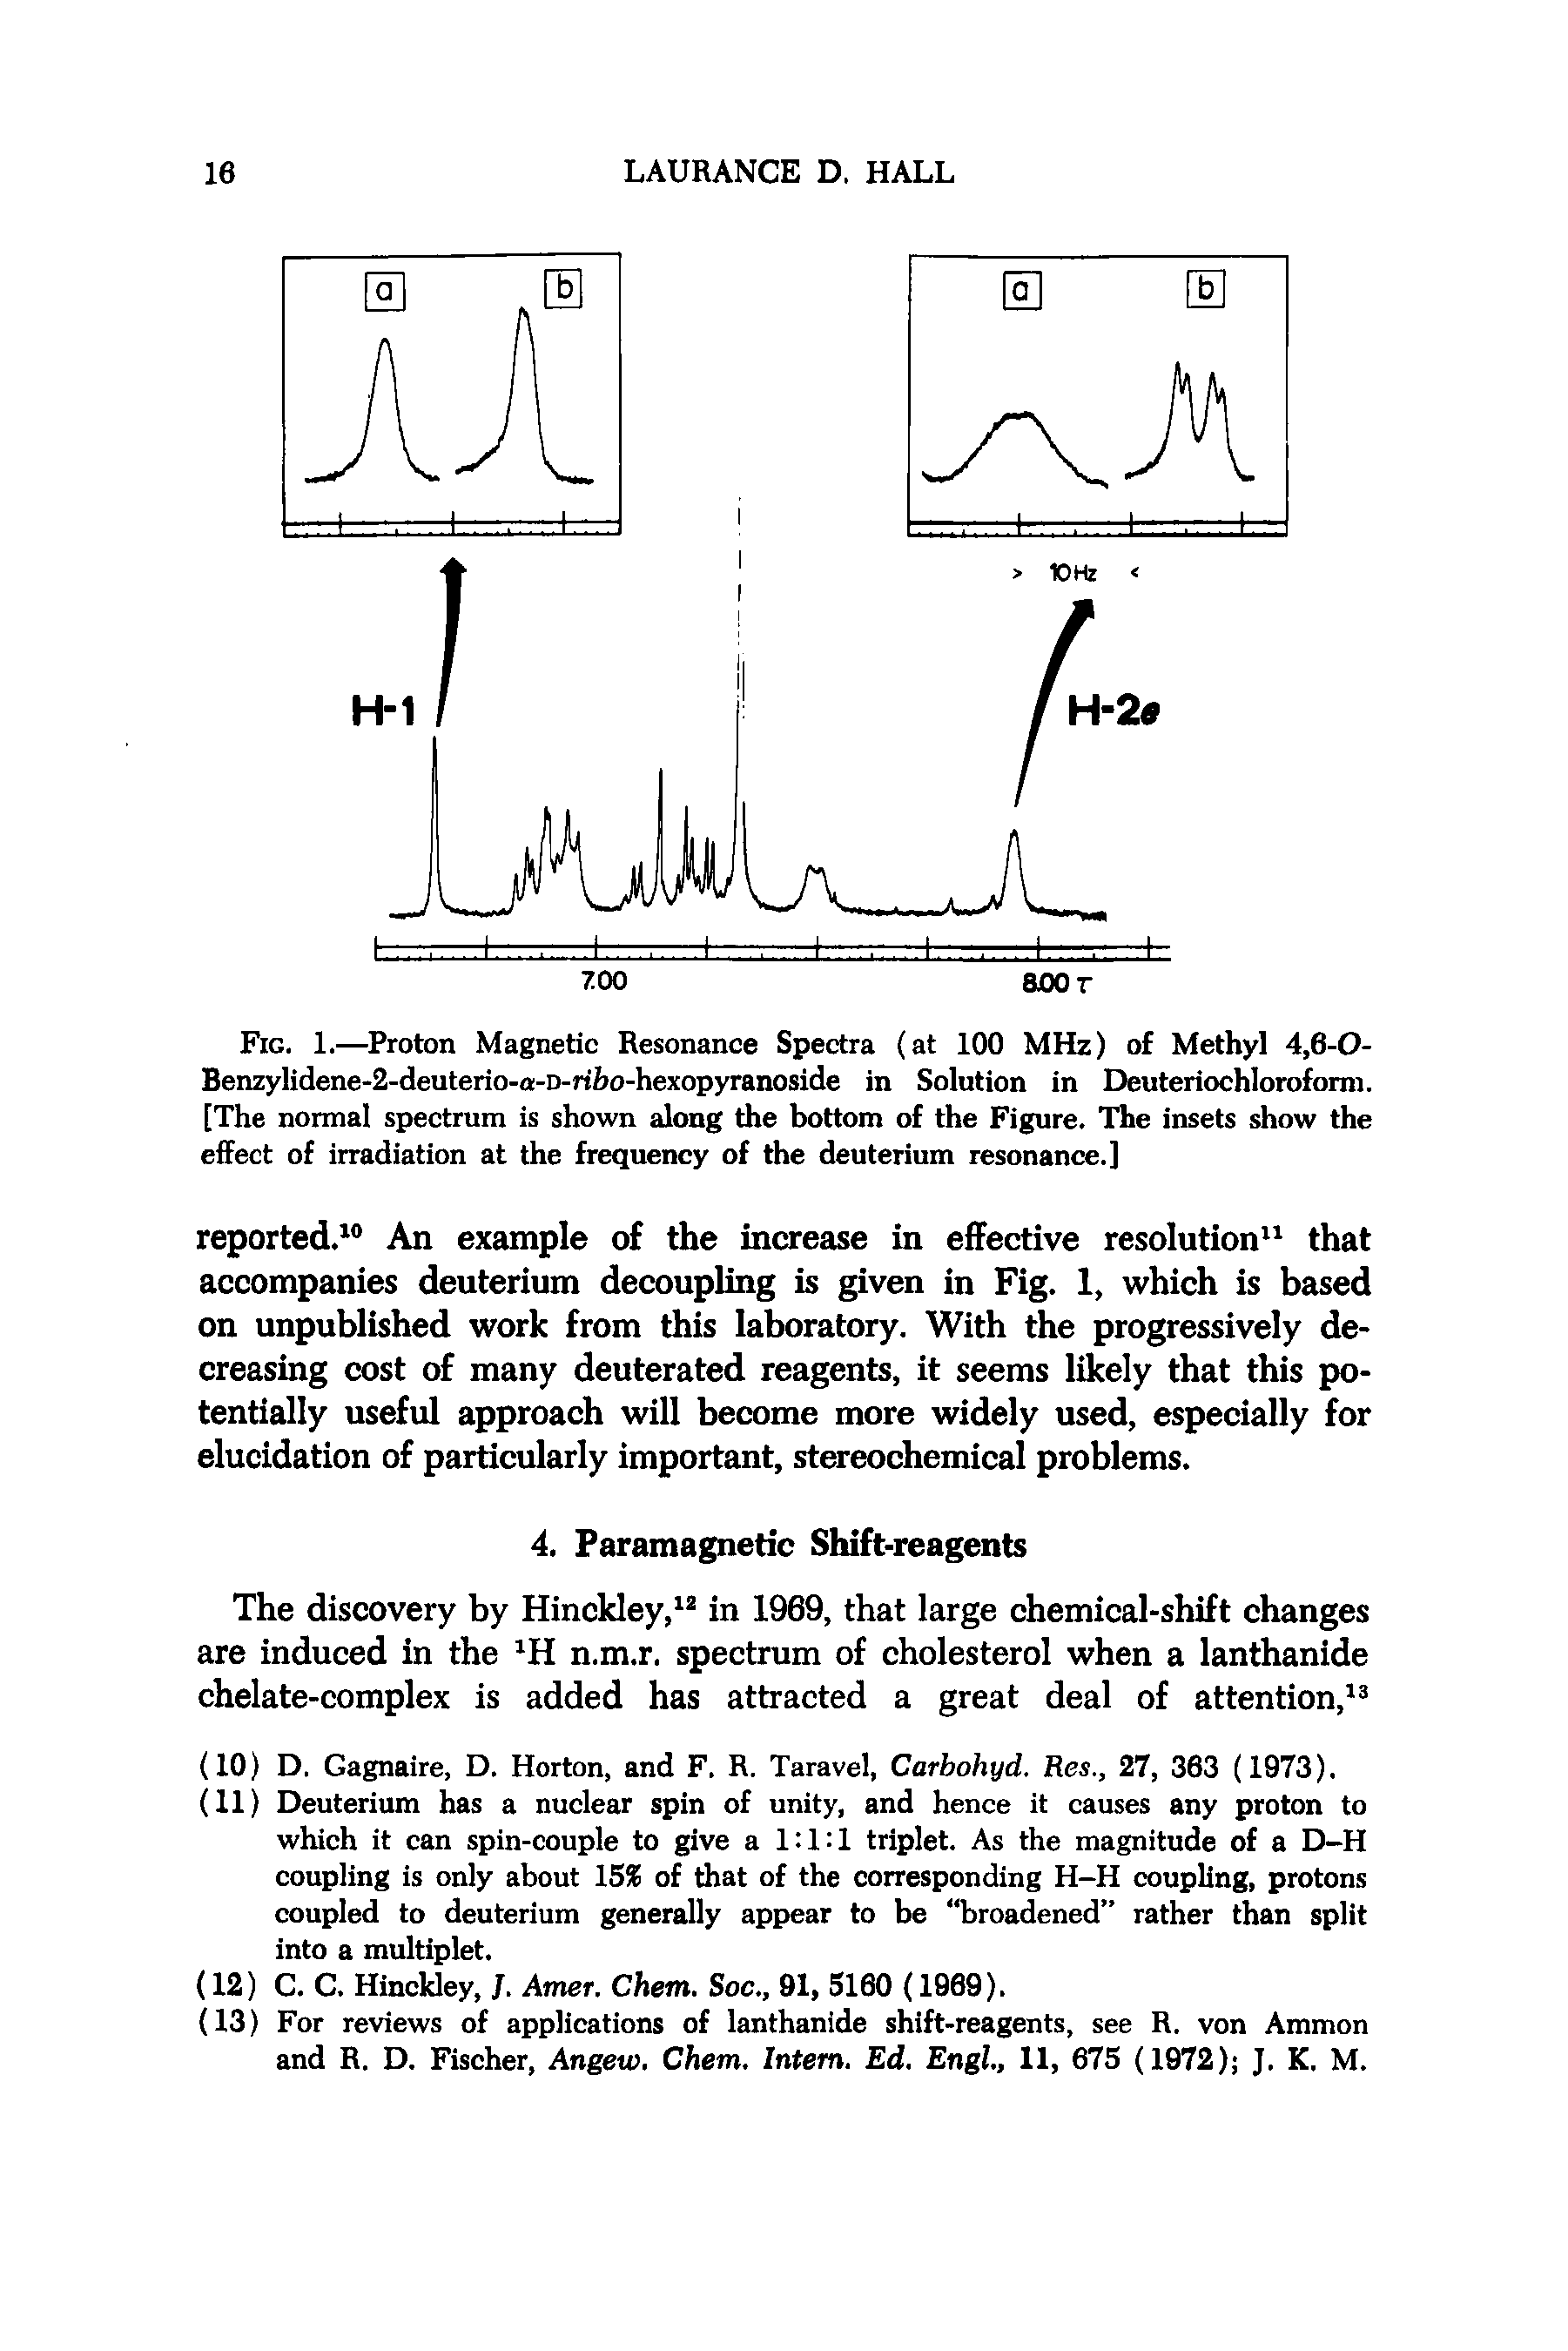 Fig. 1.—Proton Magnetic Resonance Spectra (at 100 MHz) of Methyl 4,6-0-Benzylidene-2-deuterio-a -D-riho-hexopyranoside in Solution in Deuteriochlorofomi. [The normal spectrum is shown along the bottom of the Figure. The insets show the effect of irradiation at the frequency of the deuterium resonance.]...